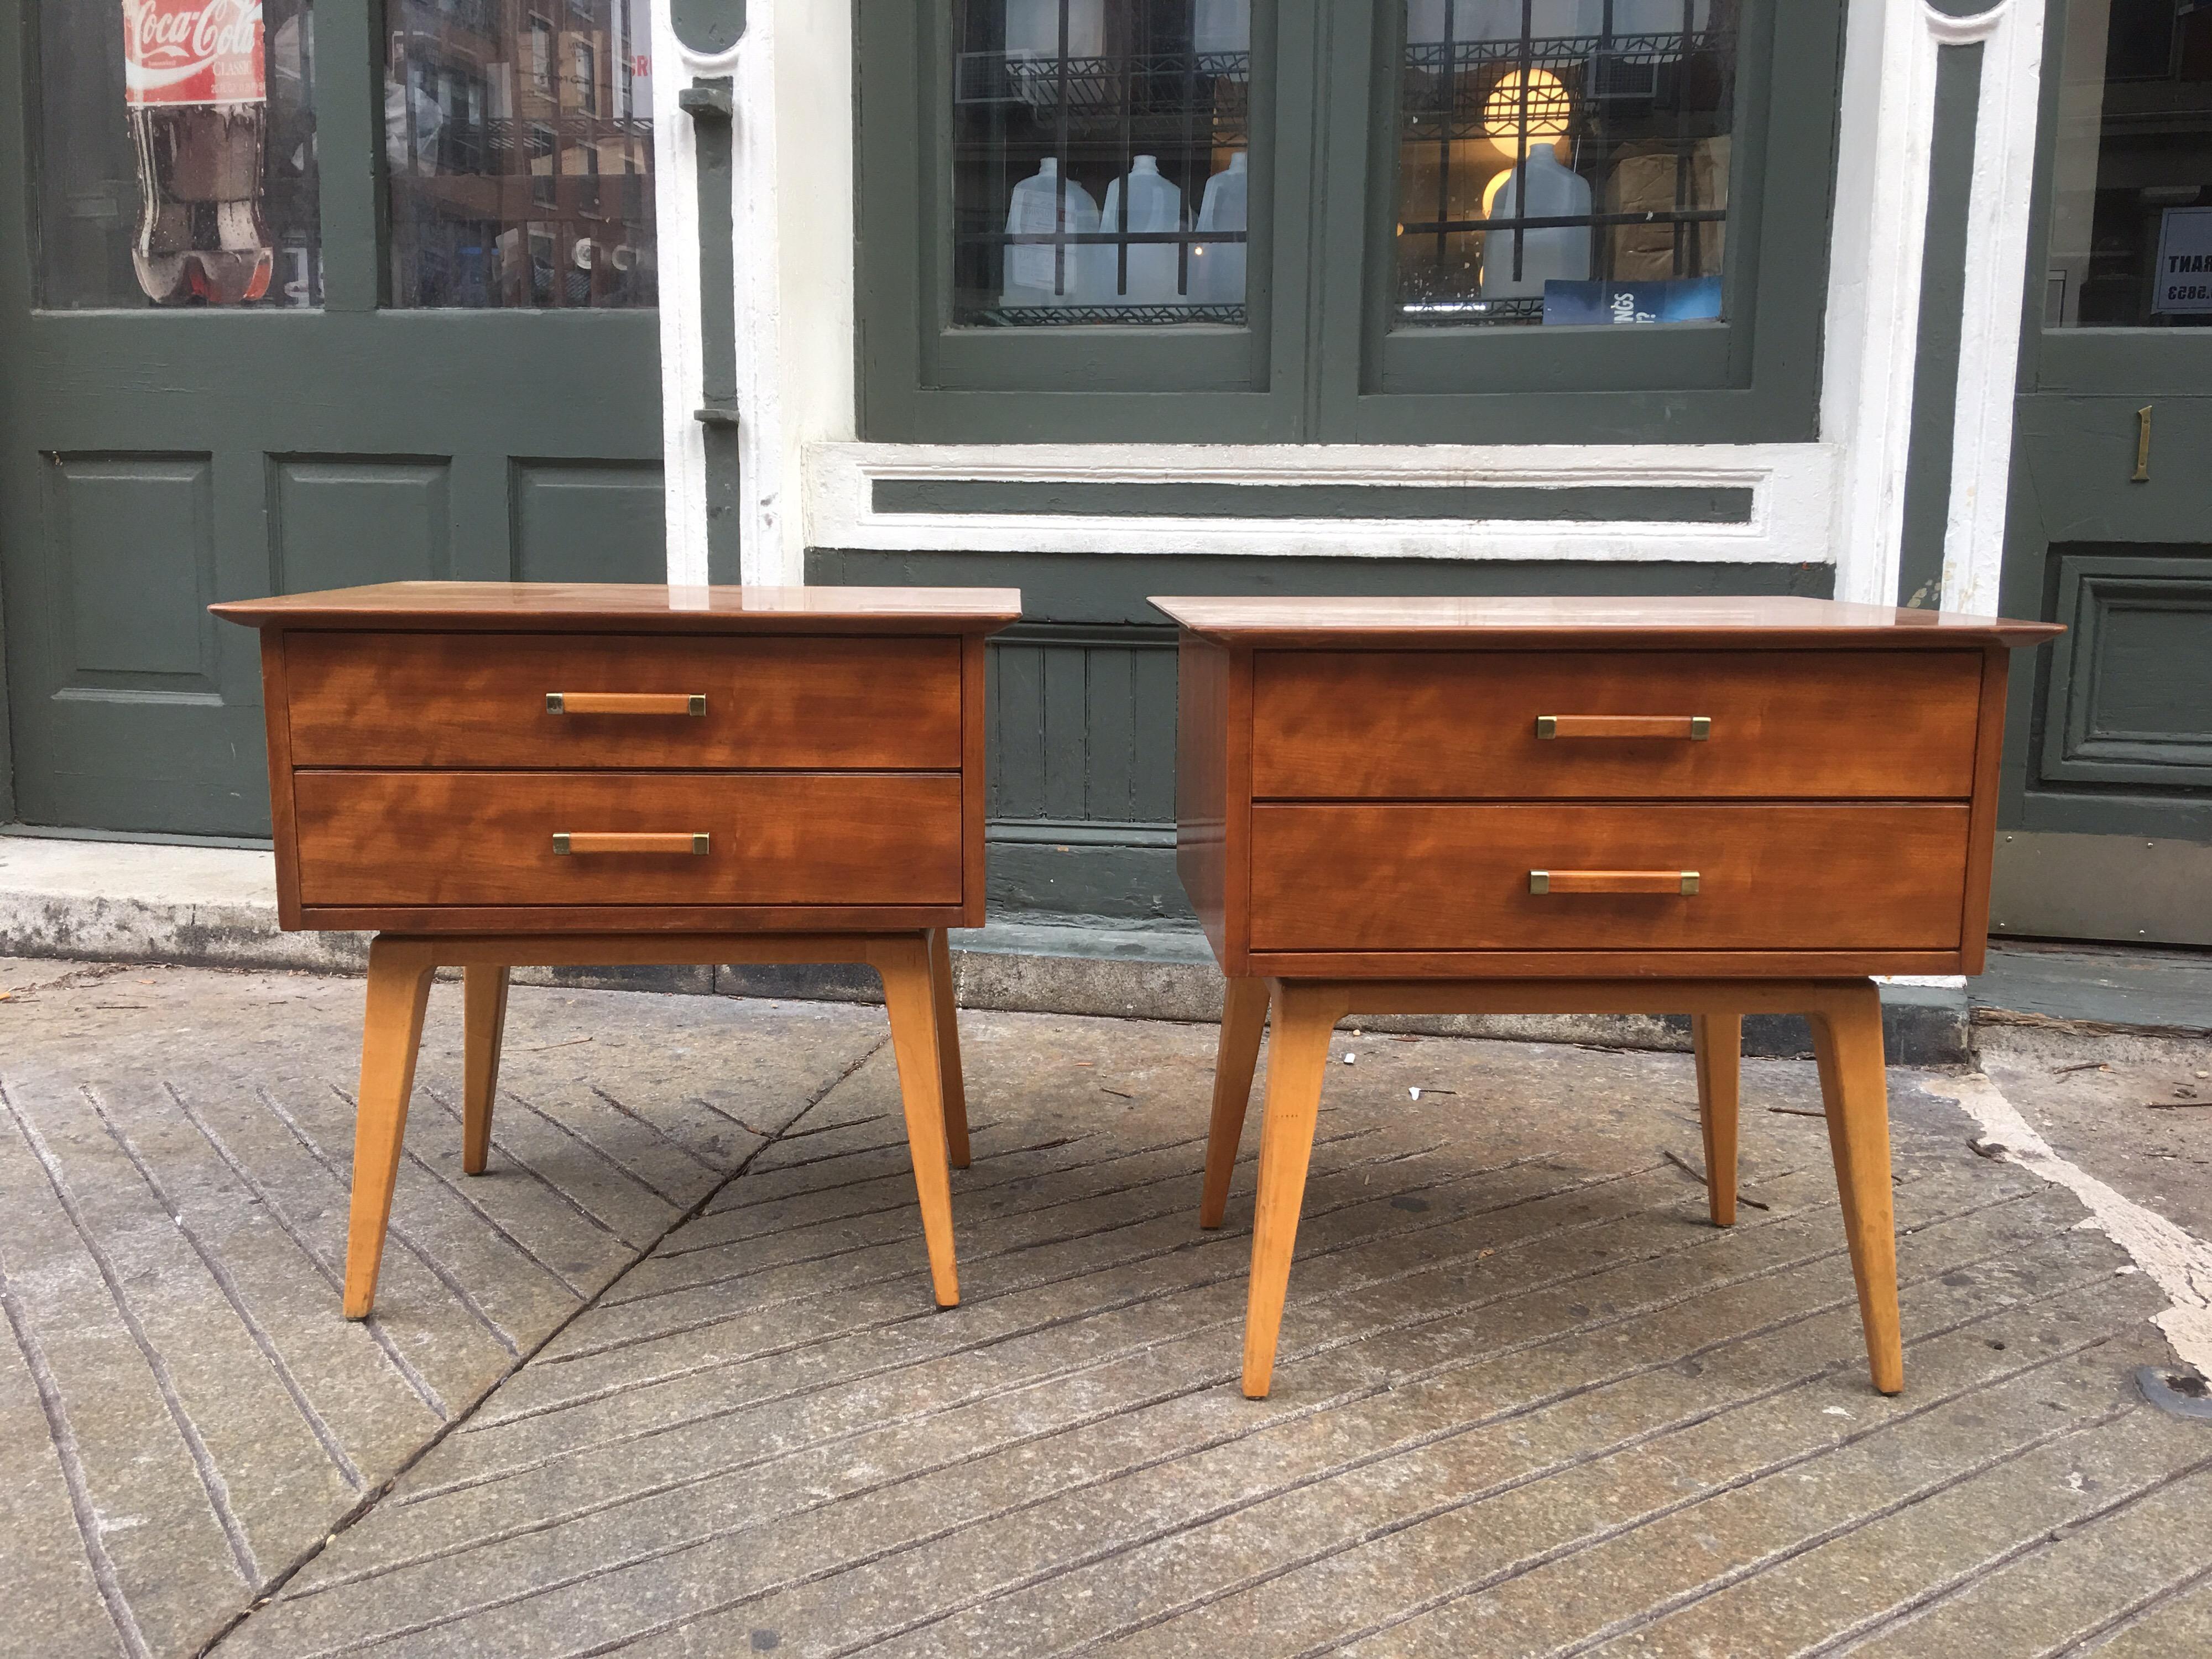 Renzo Rutili pair of nightstands for Johnson Furniture Company. Walnut tops with tapered birch legs. Beveled edge tops overhang cabinet bodies. Nightstands are finished on all sides.